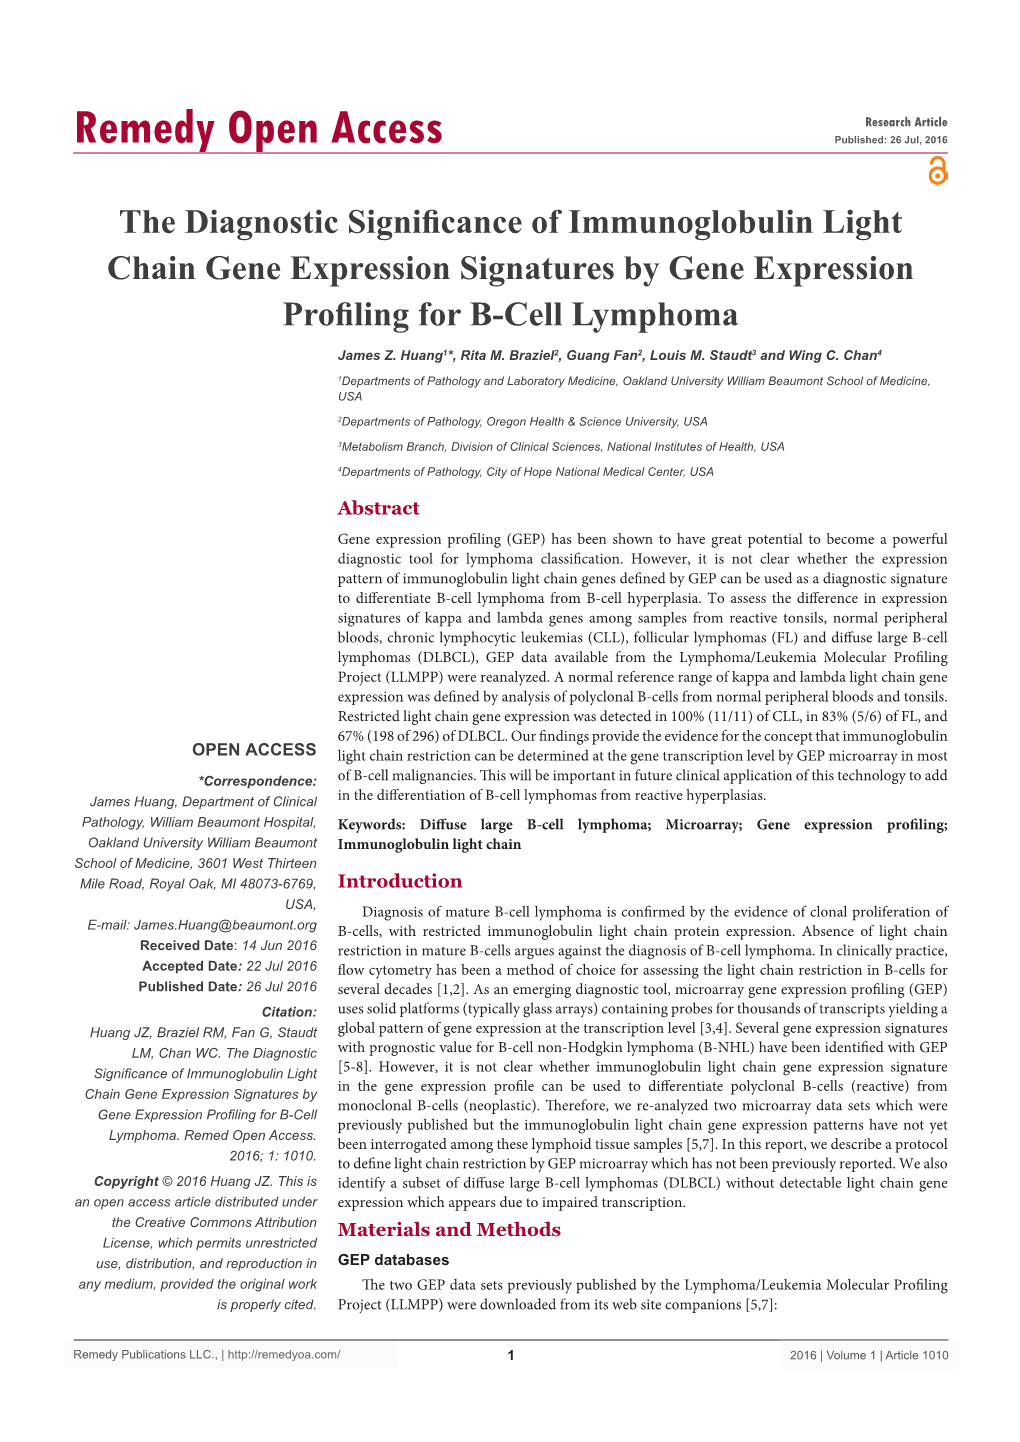 The Diagnostic Significance of Immunoglobulin Light Chain Gene Expression Signatures by Gene Expression Profiling for B-Cell Lymphoma